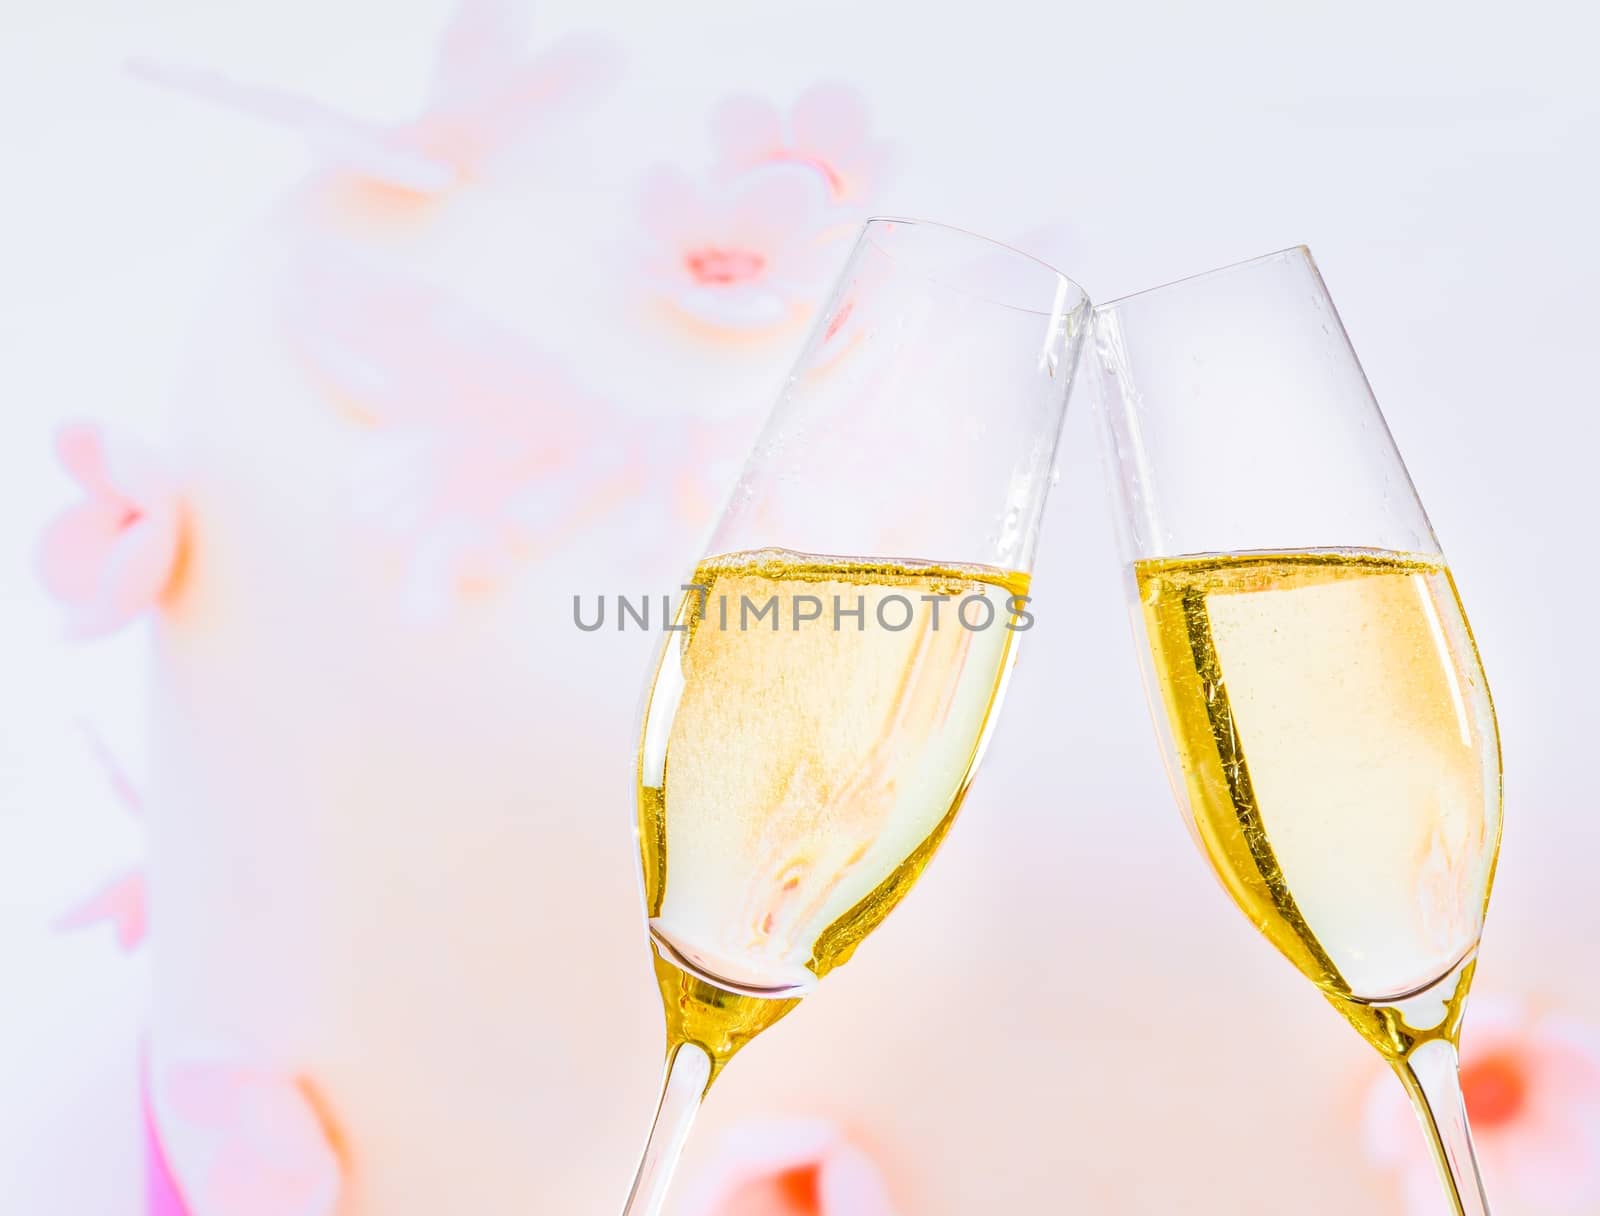 champagne flutes with golden bubbles on wedding cake background by donfiore